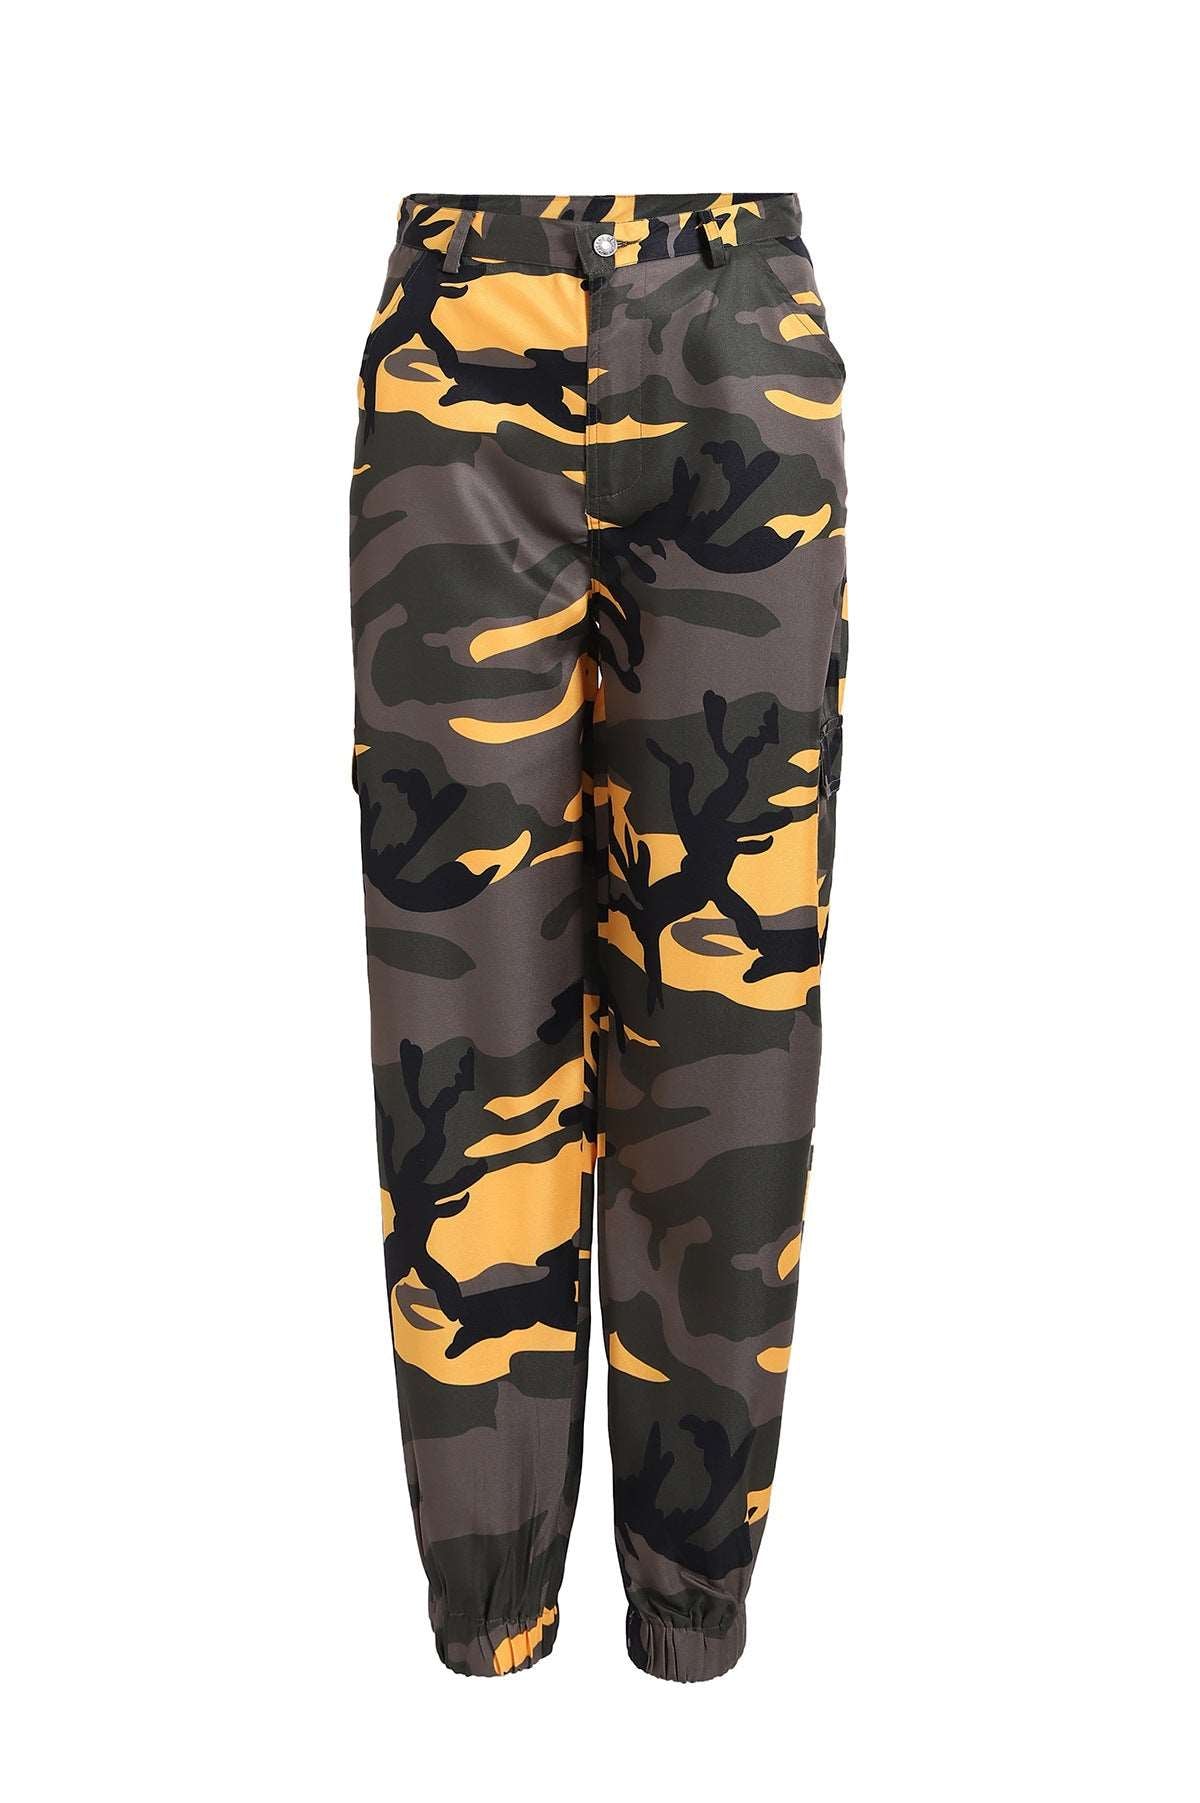 Harem Design Camo Trousers with Ideal Blend